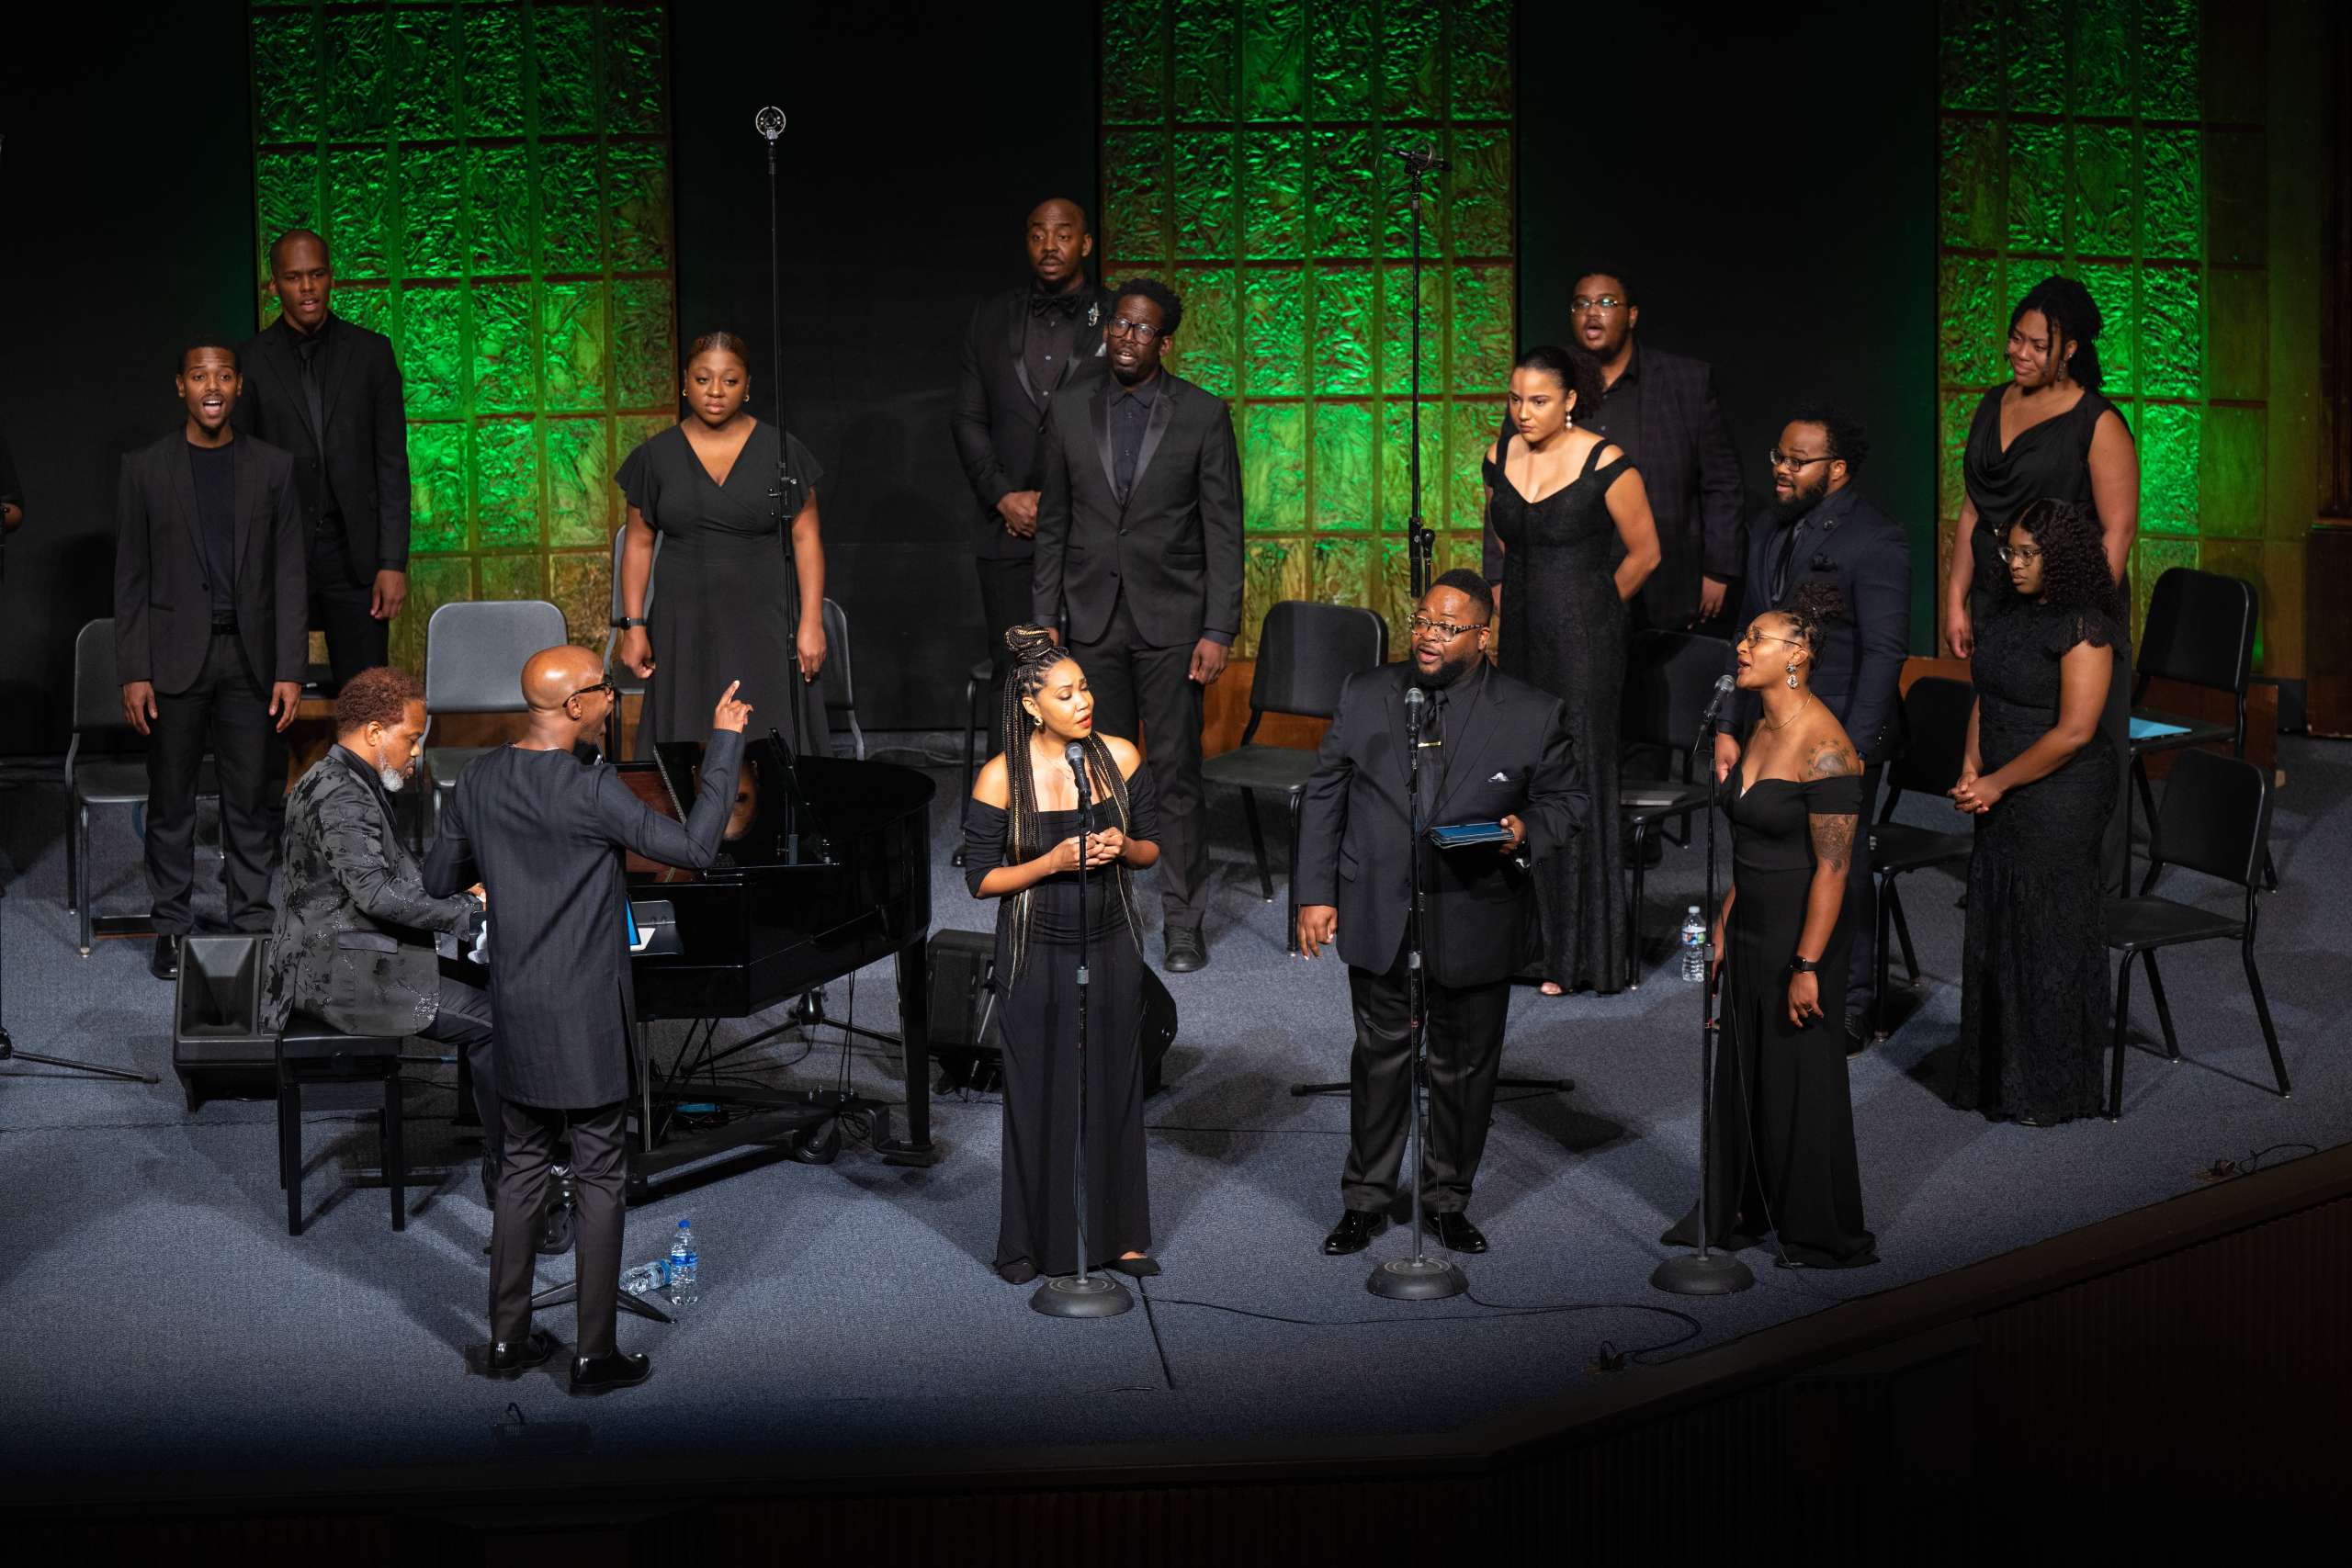 An ensemble of singers dressed in formal black attire stands ready to perform on stage, with a male conductor at the forefront, gesturing expressively towards a seated pianist.